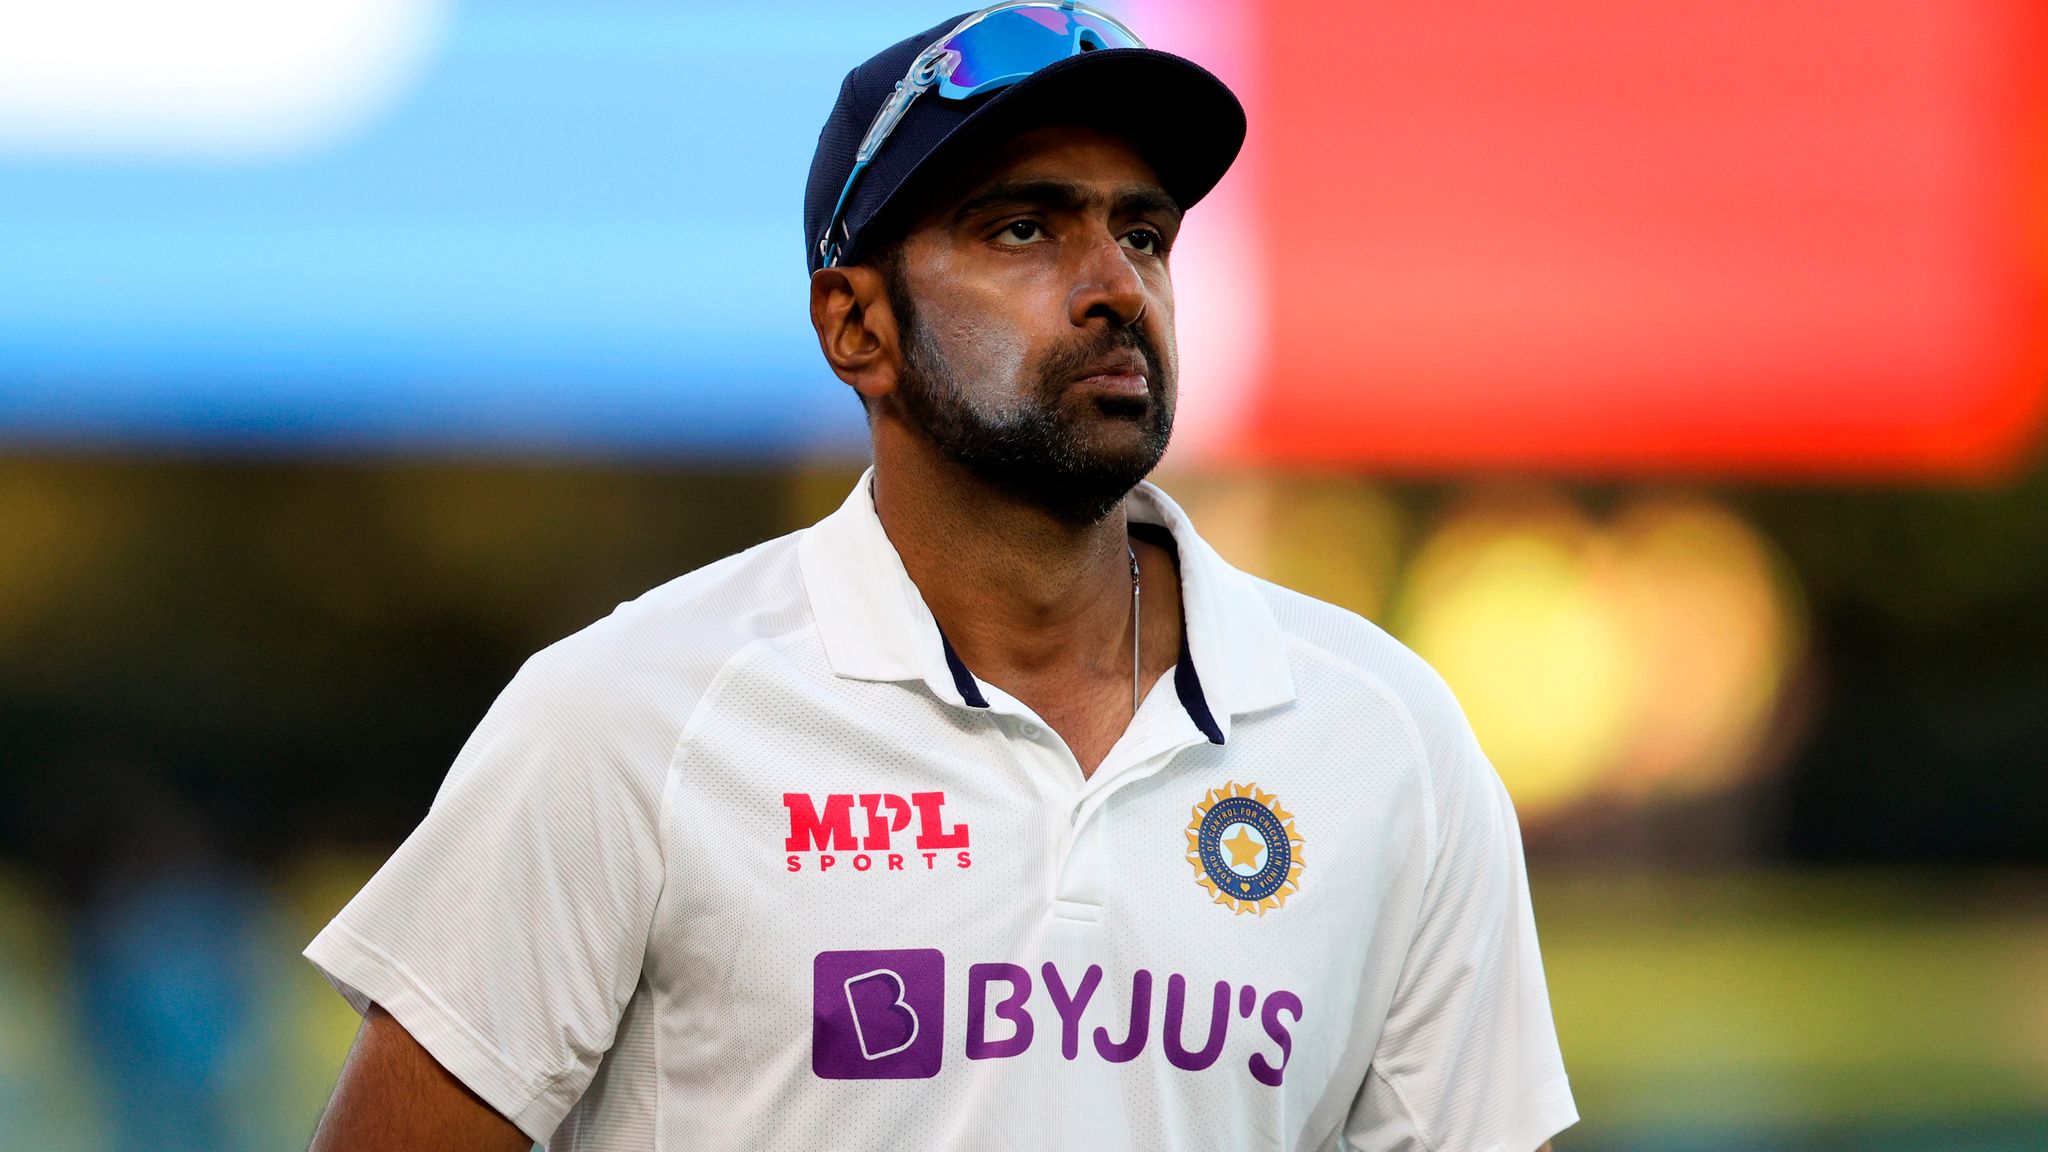 ENG vs IND: R Ashwin name not included in playing 11 of 1st test